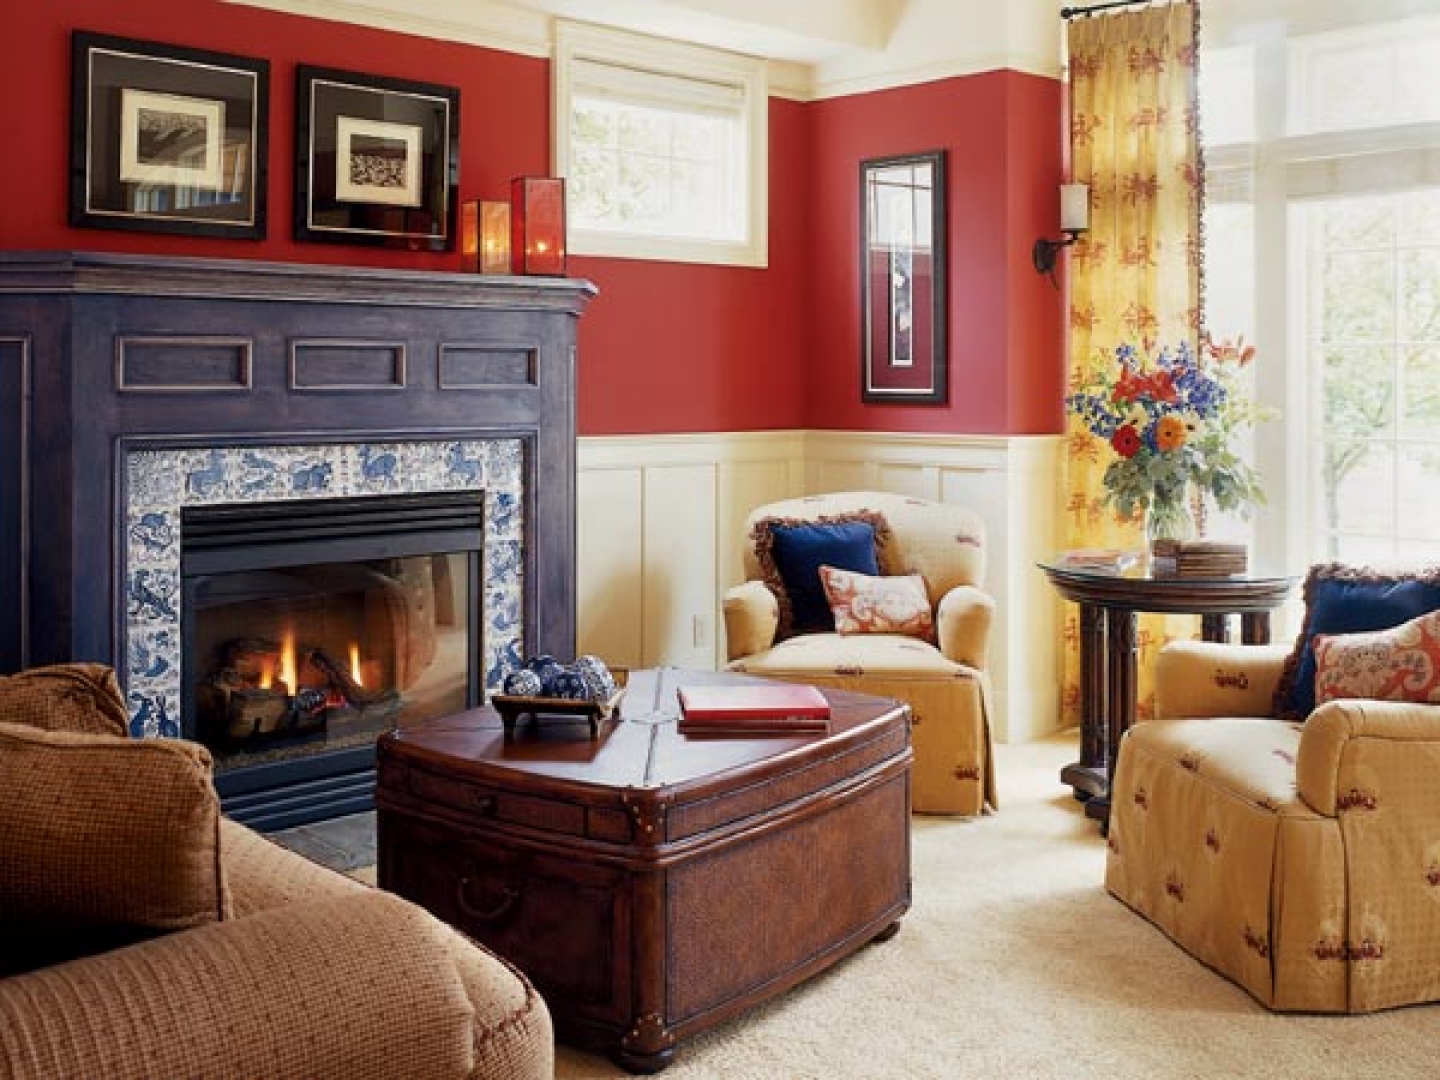 Living Room Color Ideas With Red Furniture